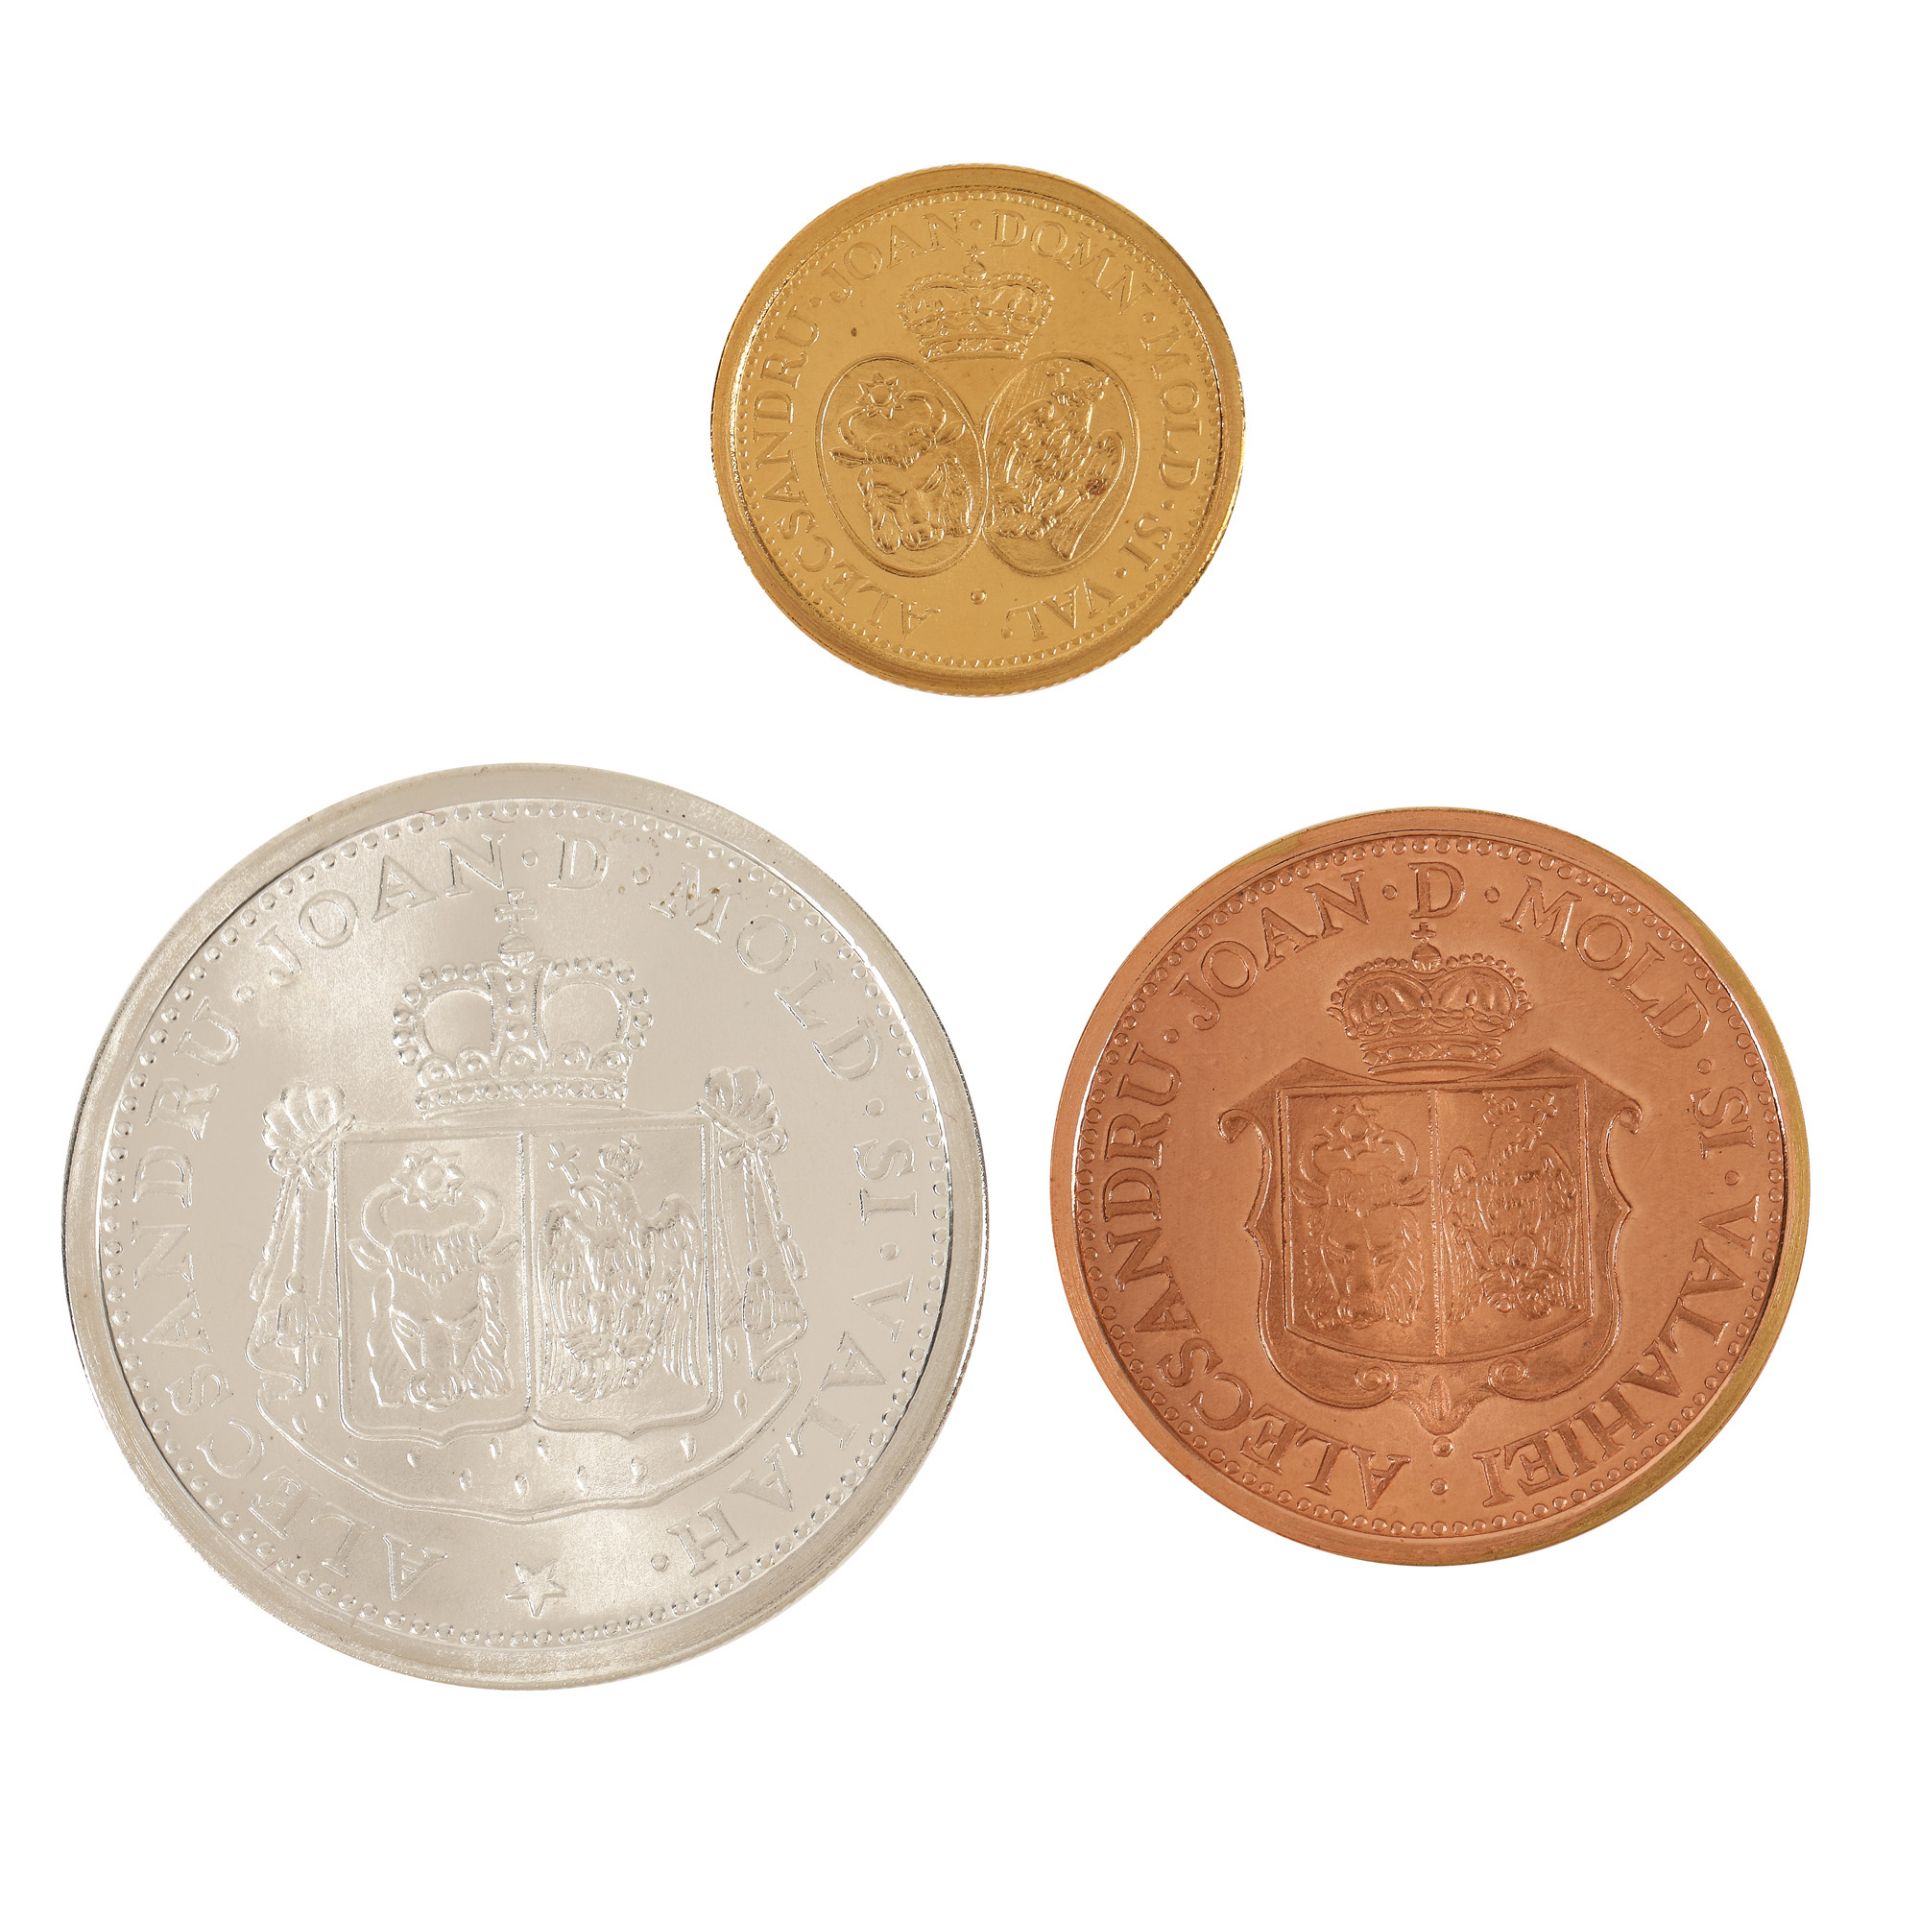 Three BNR commemorative coins, Coin projects from 1860 - Alexandru Ioan Cuza